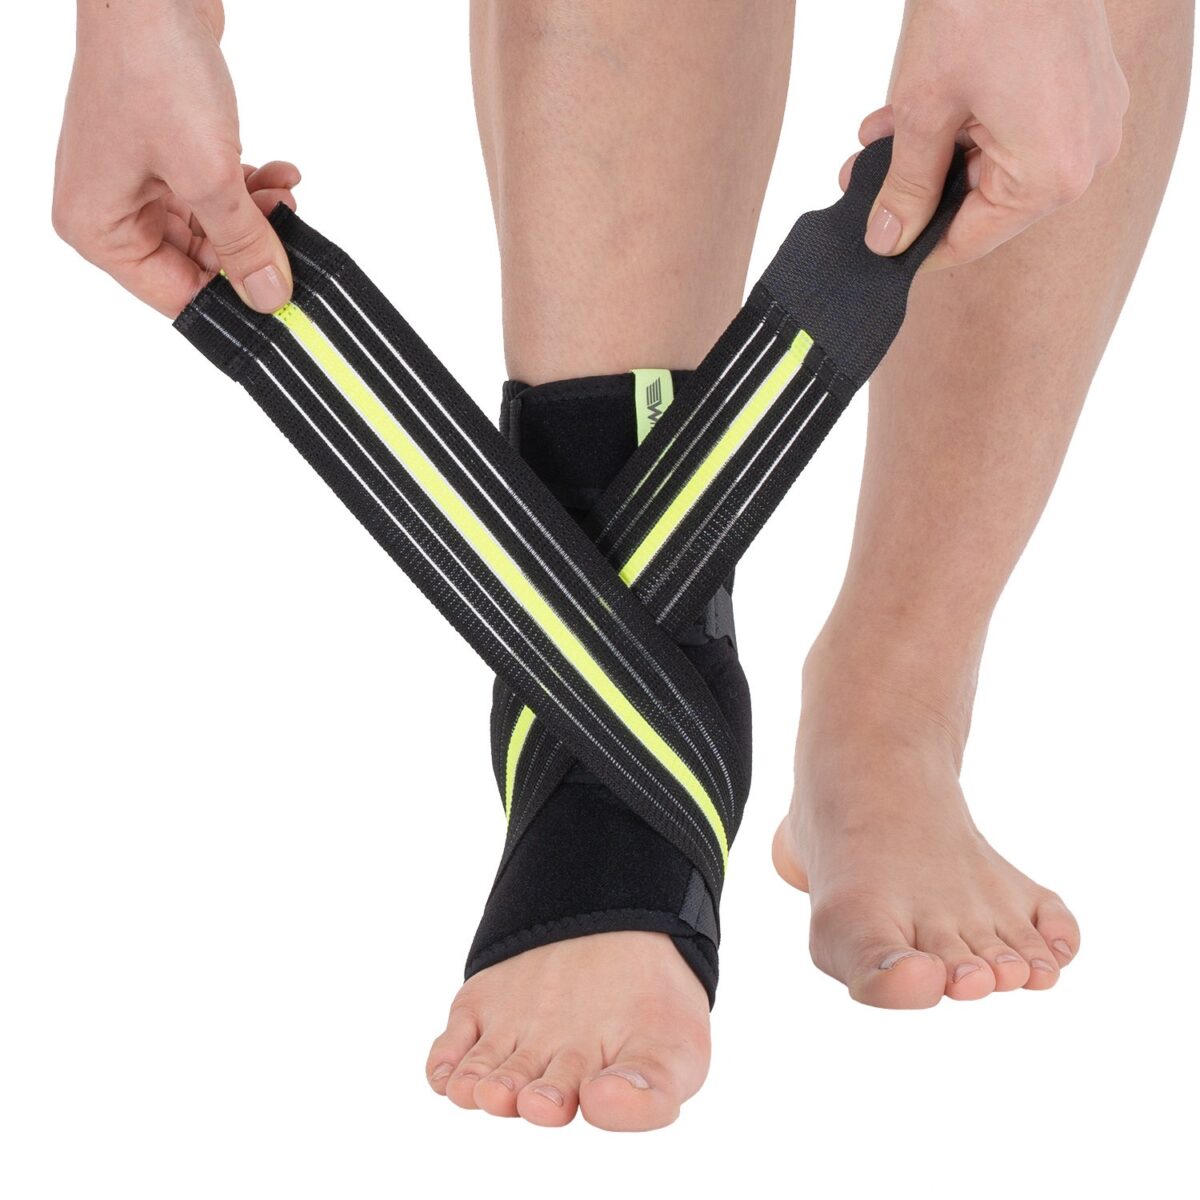 wingmed orthopedic equipments W605 malleol ankle support with 8 strap 77 1